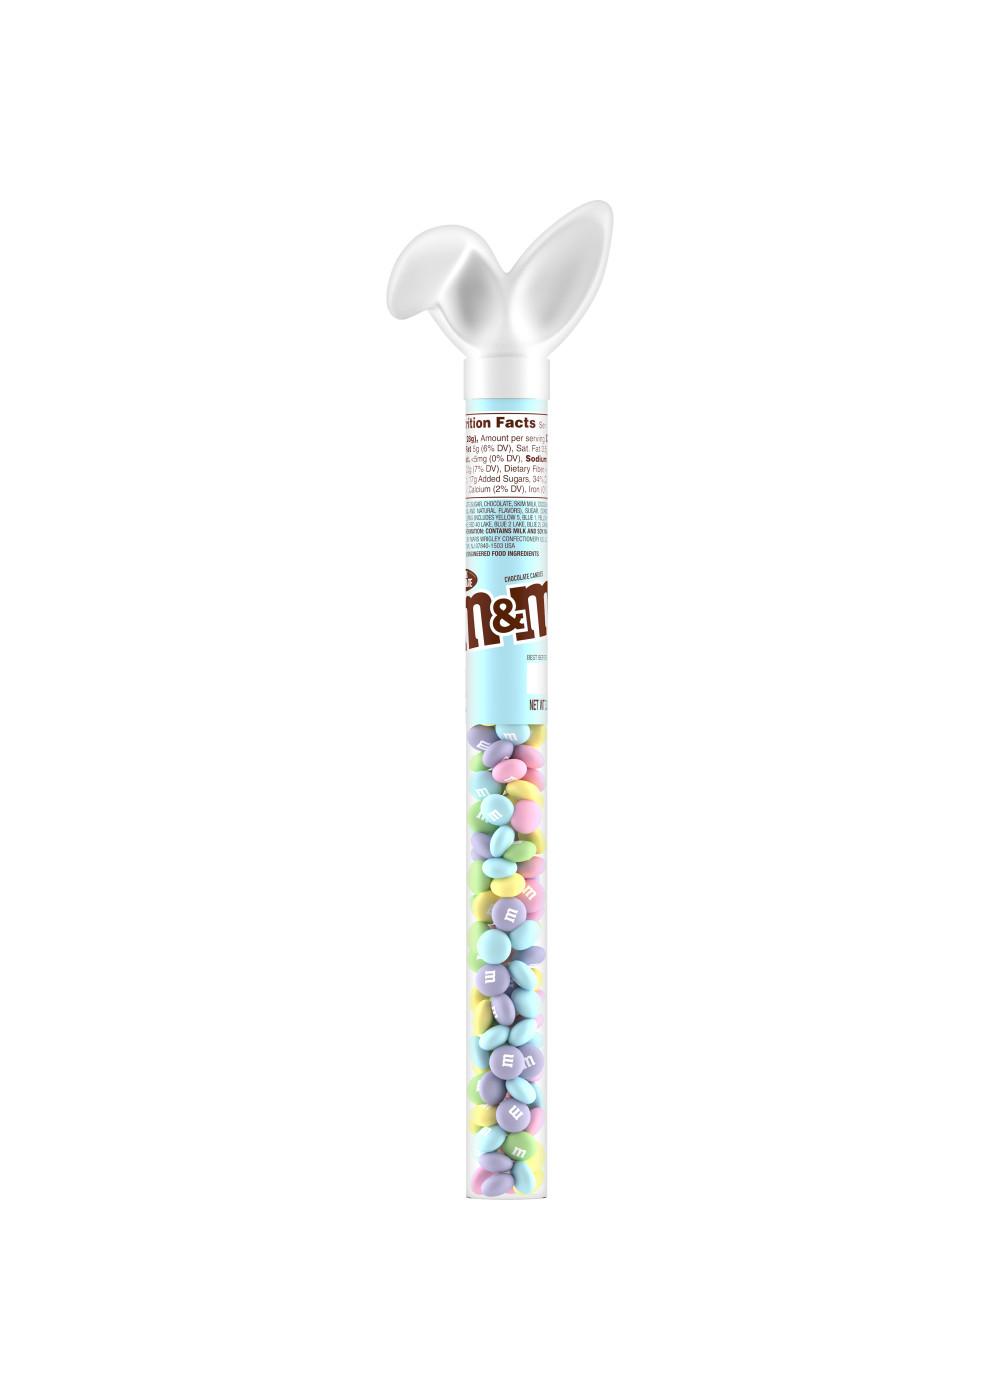 M&M'S Milk Chocolate Easter Candy Bunny Cane; image 1 of 7